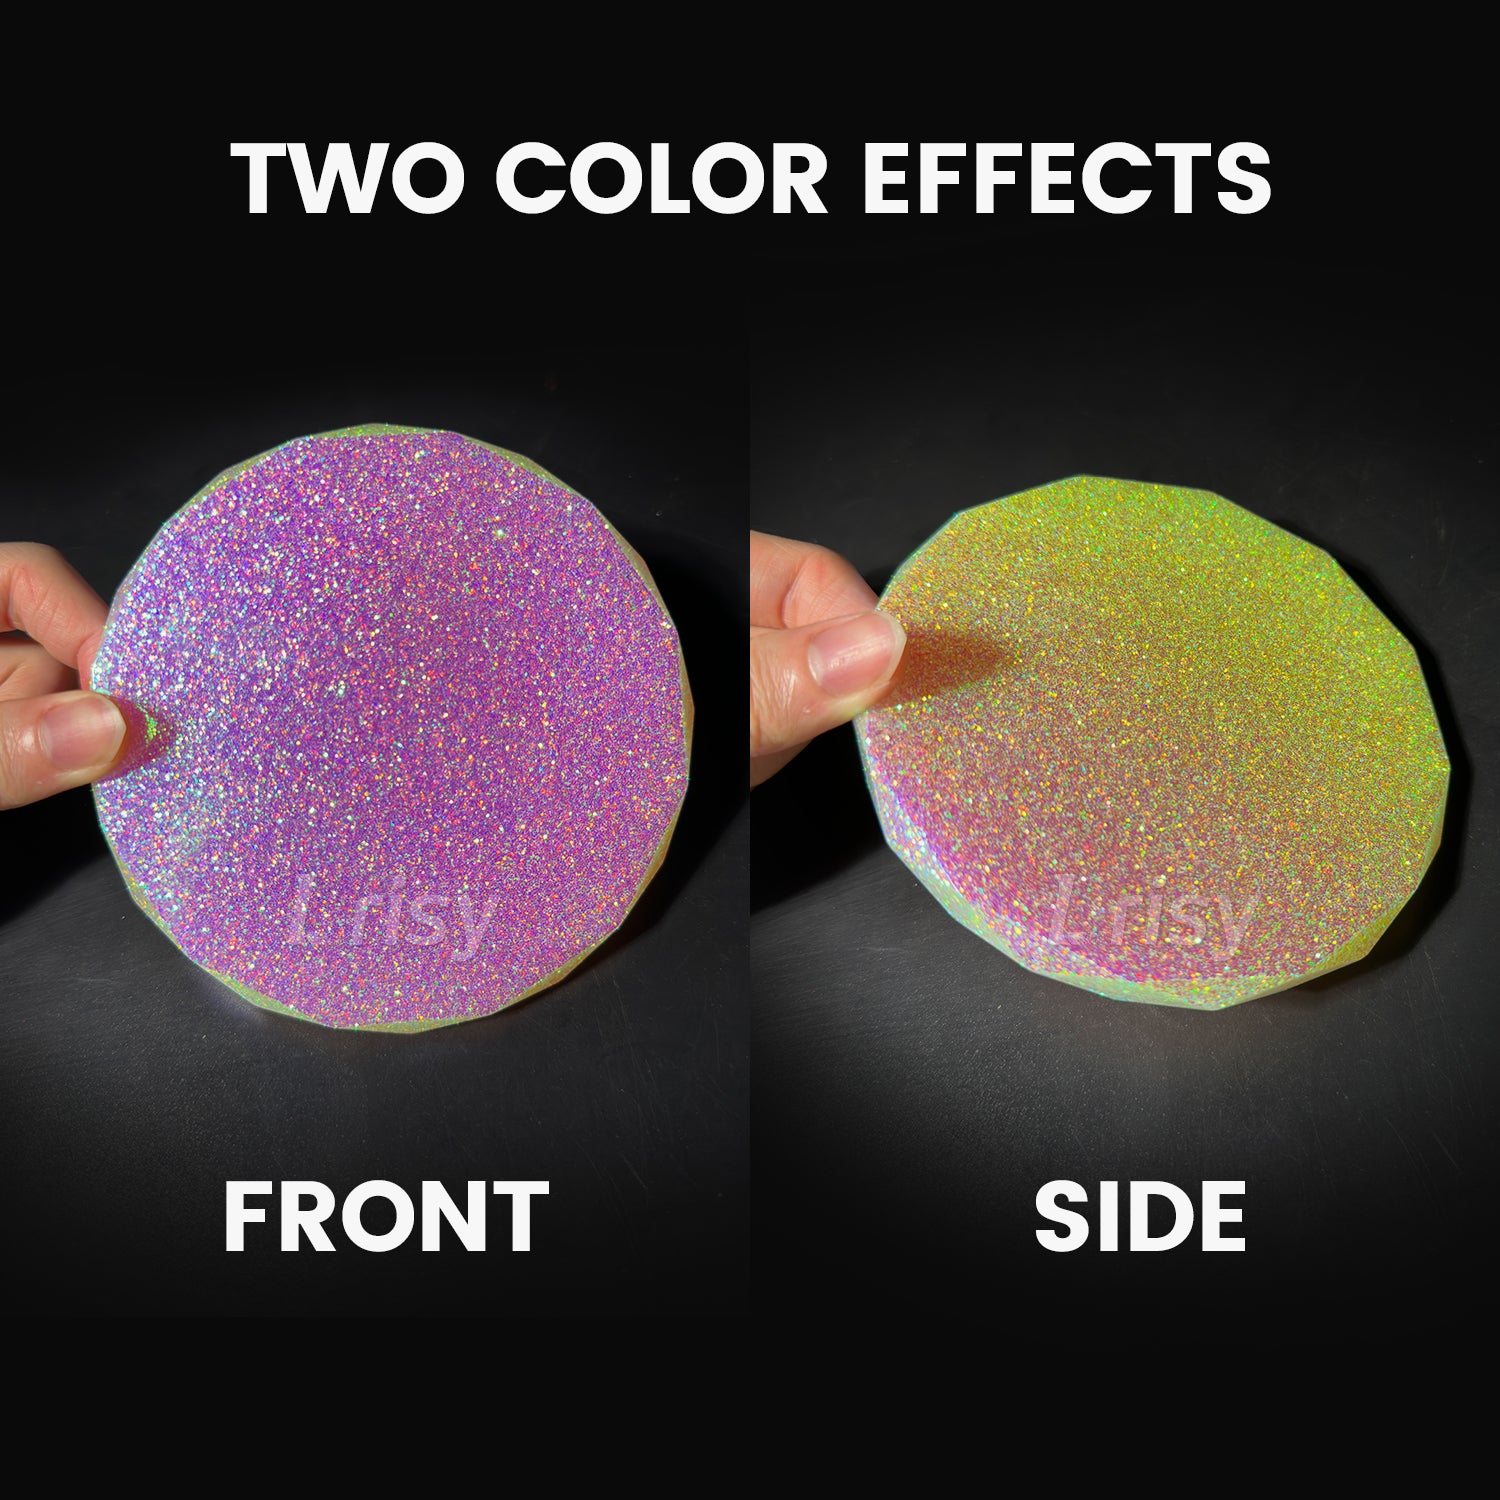 Lrisy Holographic Extra Fine Glitter Powder with Shaker Lid 140g/4.5oz (Ultra Thin Brighter Iridescent Dream Pink and White F322R)